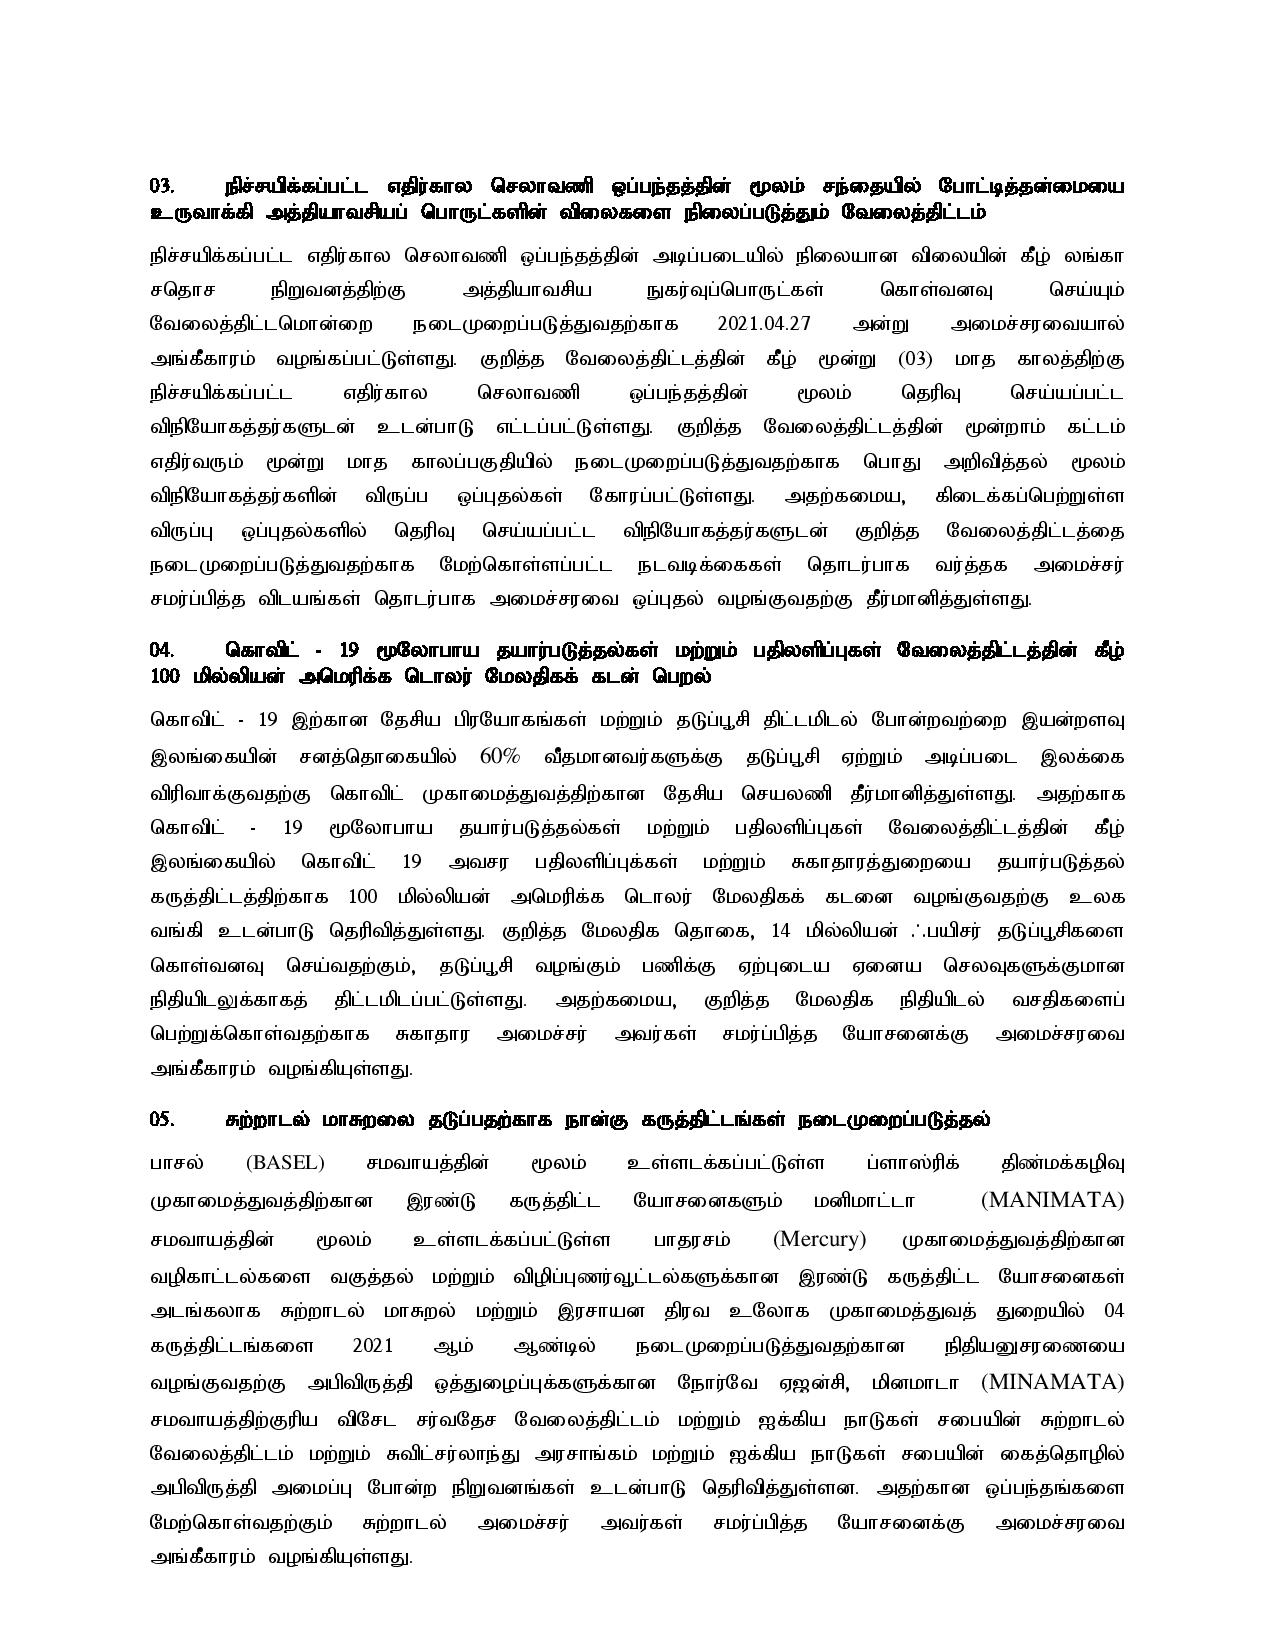 Cabinet Decisions on 21.09.2021 Tamil page 002